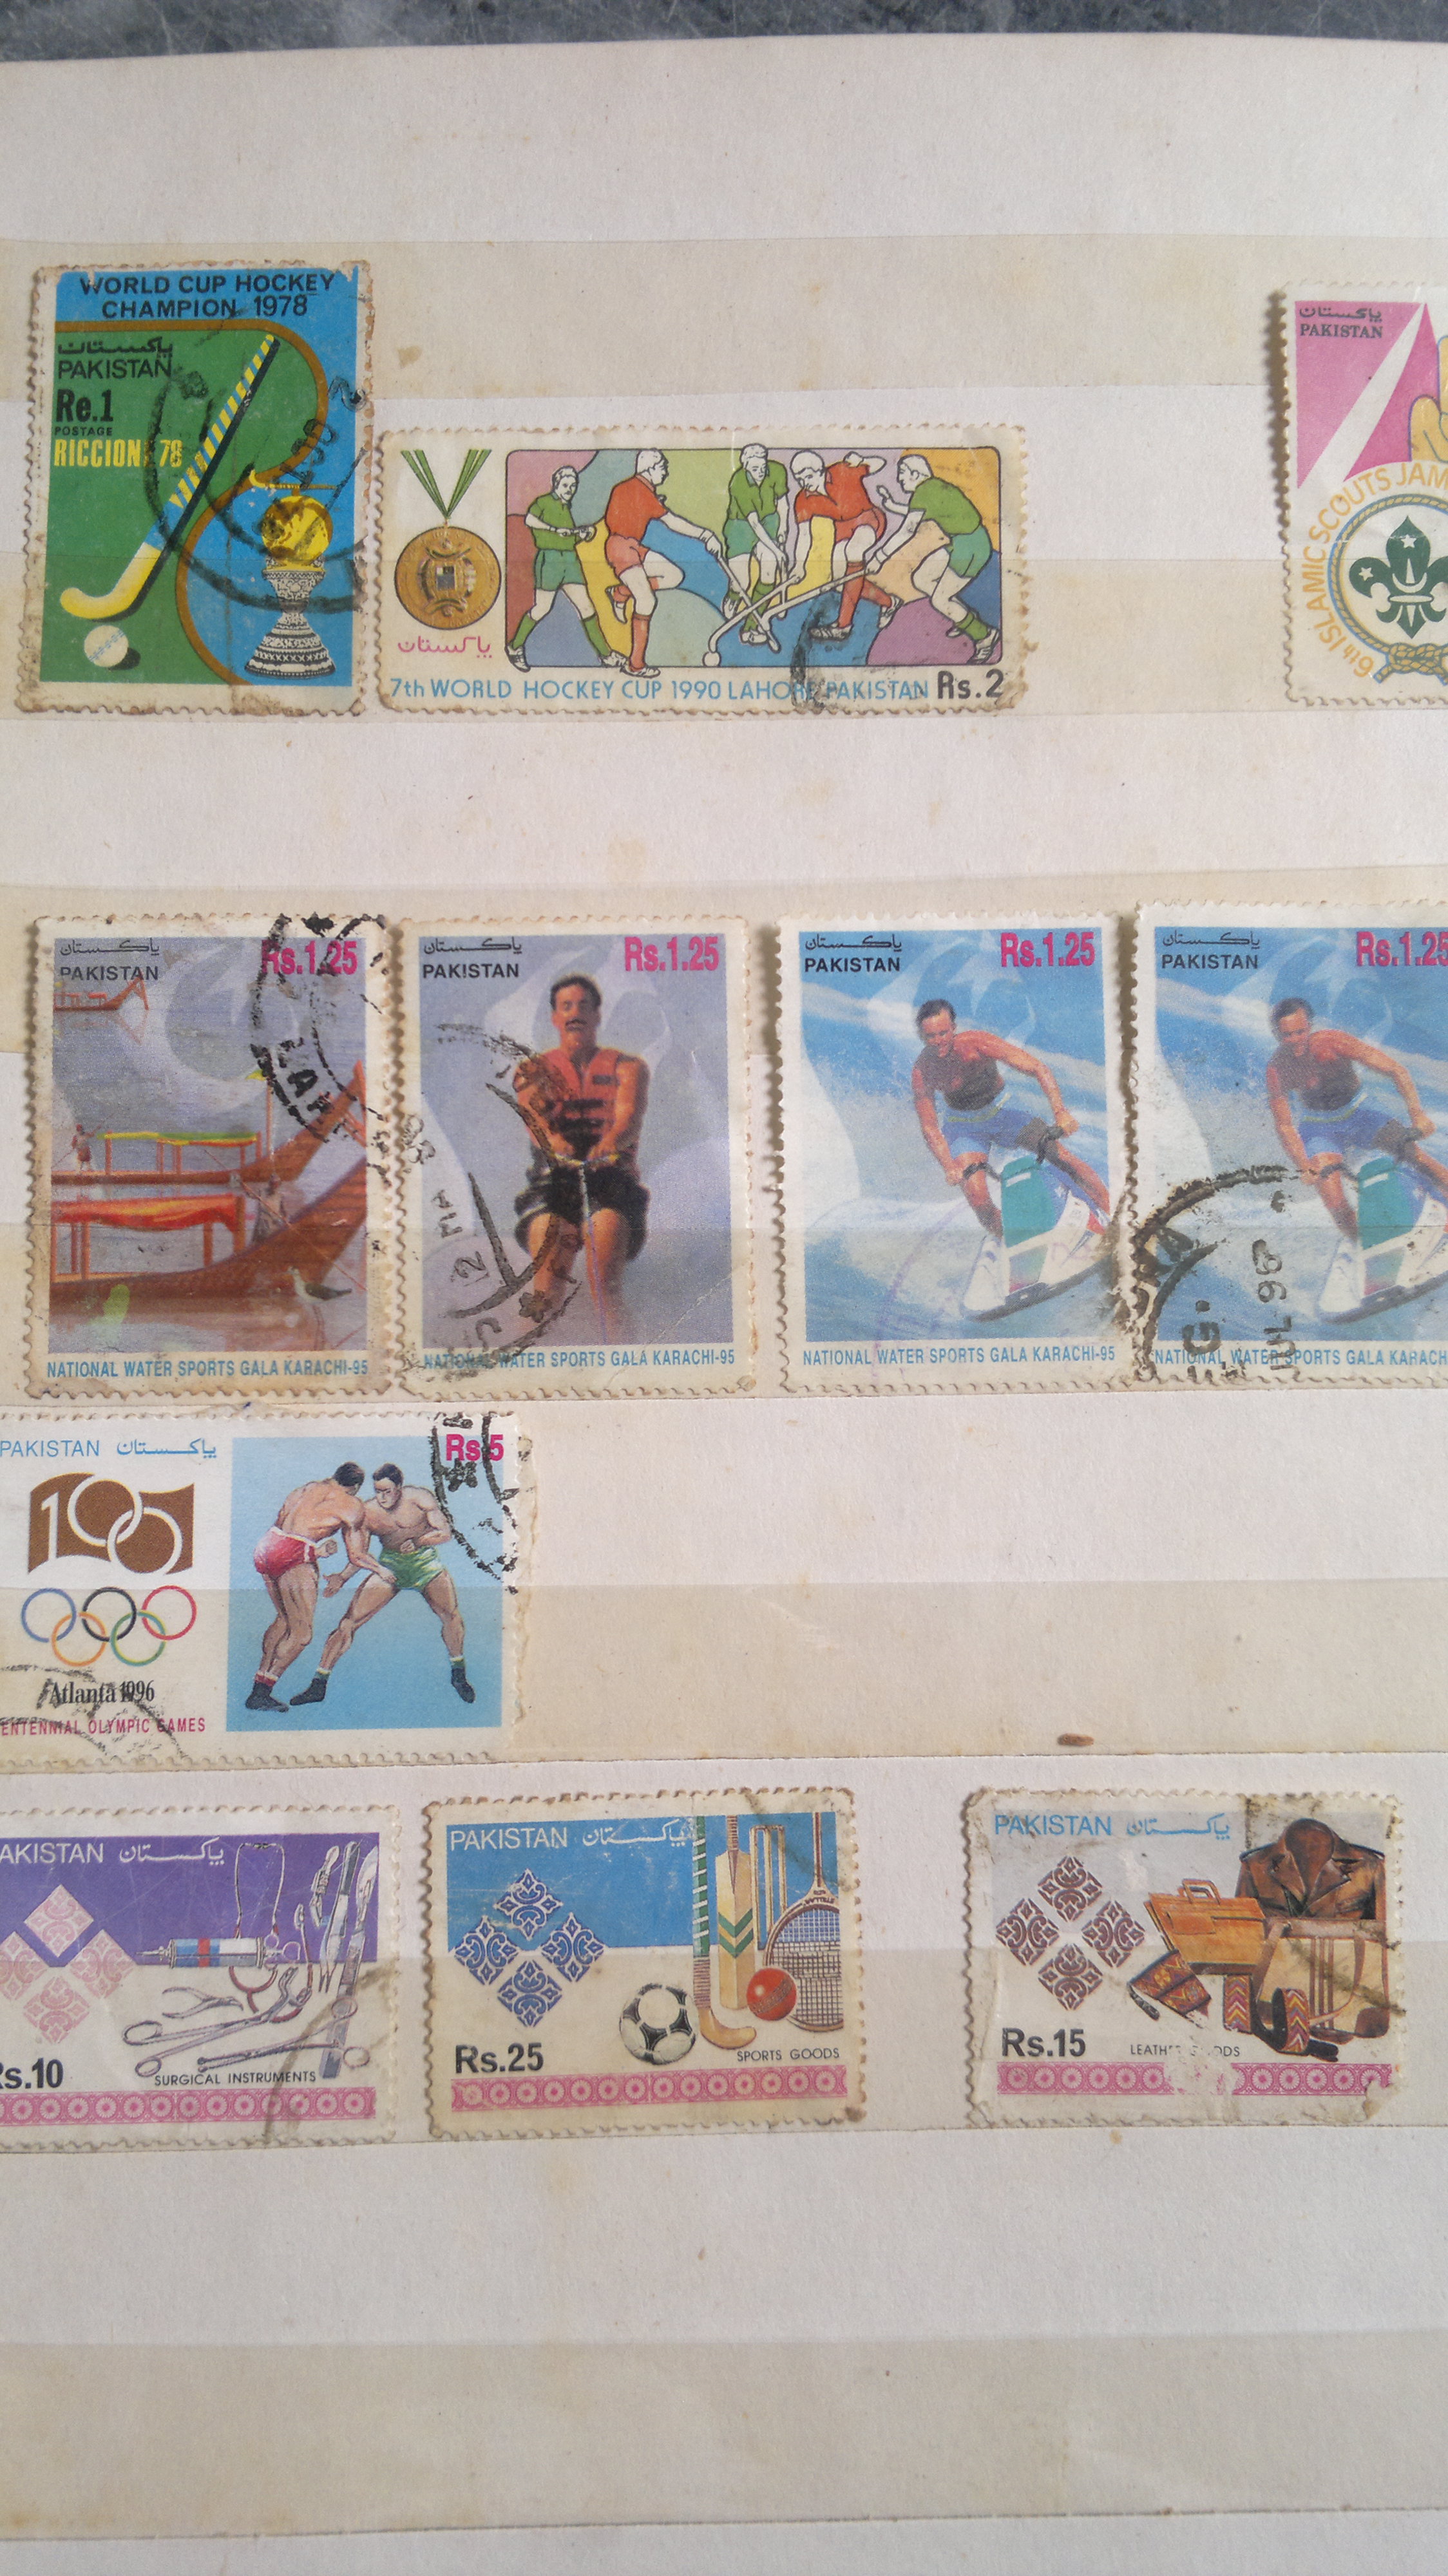 Pakistani Stamps featuring Games and Sports